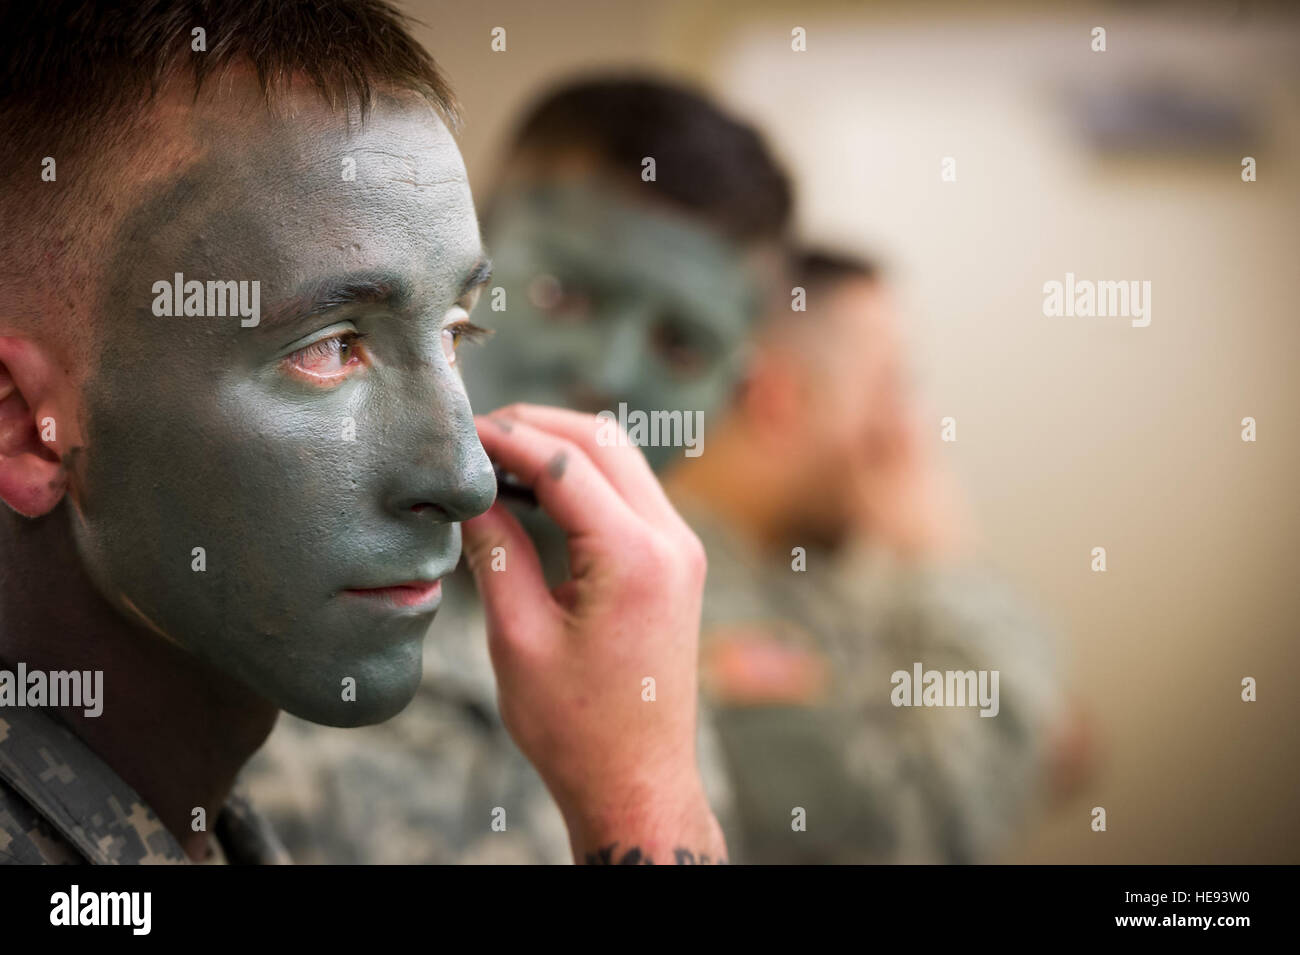 Army Spc. Trevor Holzmeister, a paratrooper assigned to B Company, 3rd Battalion (Airborne), 509th Infantry Regiment, 4th Brigade Combat Team (Airborne), 25th Infantry Division, U.S. Army Alaska, dons camouflage face paint in preparation for a show of force demonstration at Arctic Thunder Open House 2014, July 26, 2014. Arctic Thunder is a biennial event hosted by Joint Base Elmendorf-Richardson, Alaska. Featuring more than 40 Air Force, Army and civilian aerial acts and an expected crowd of more than 200,000 people, it is the largest two-day event in the state and one of the premier aerial de Stock Photo